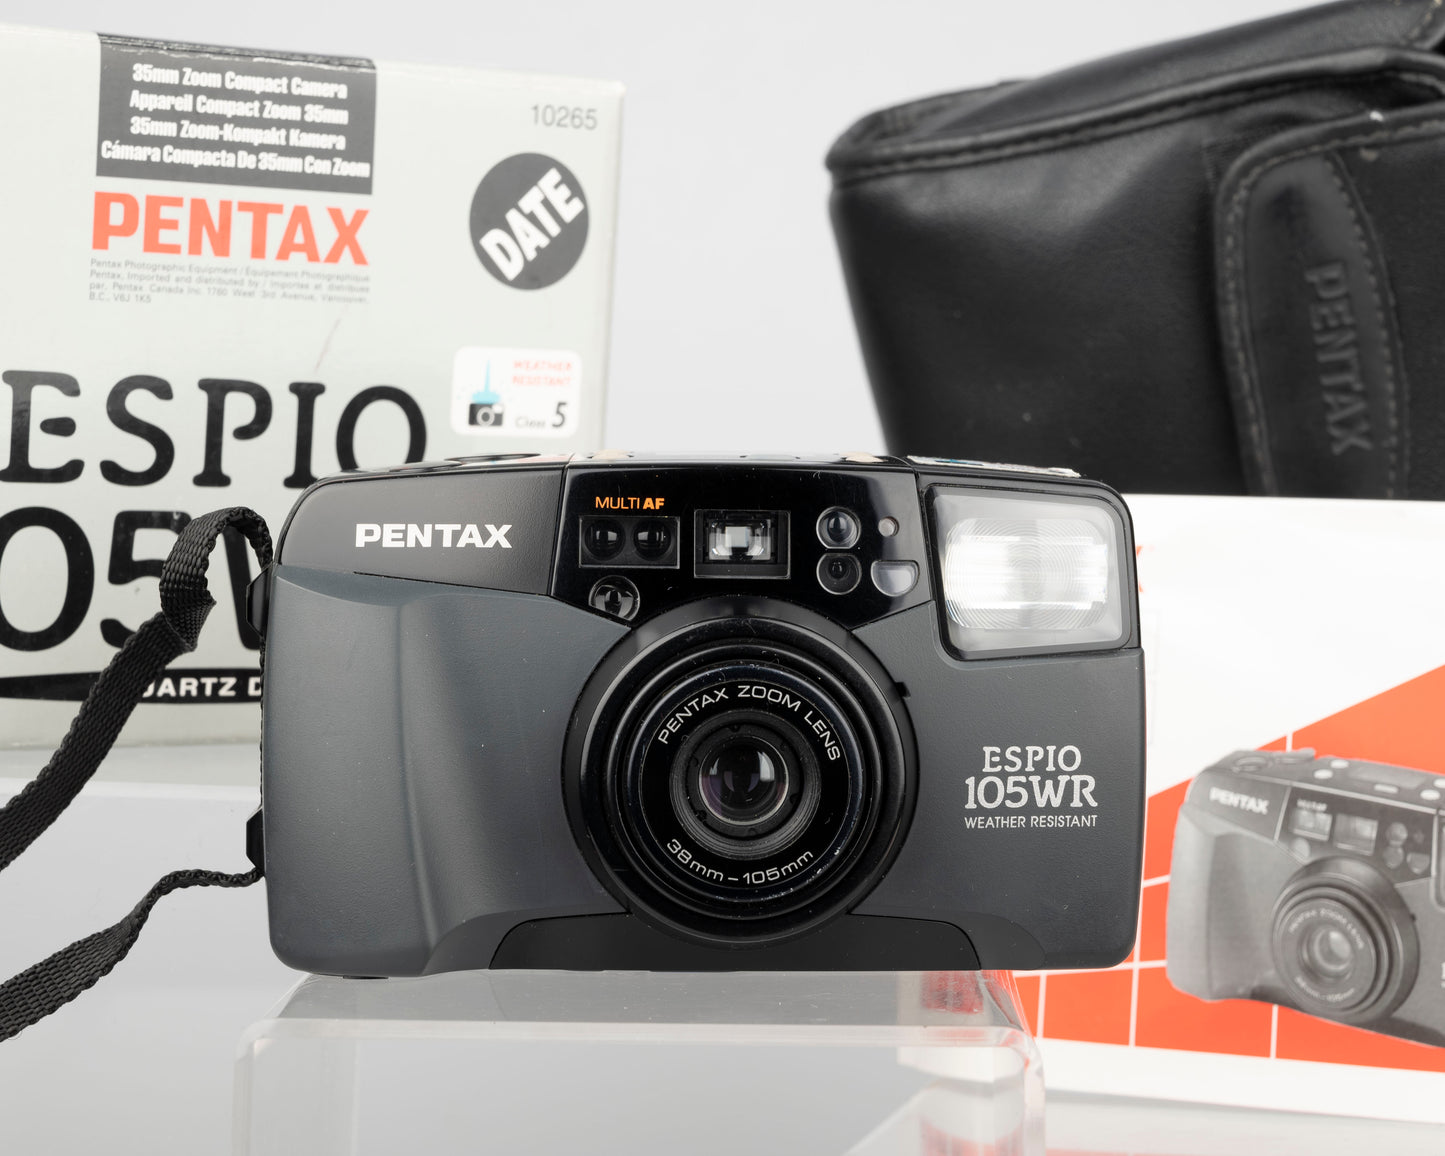 The Pentax Espio 105WR is a superb weather-resistant 35mm camera from 1999